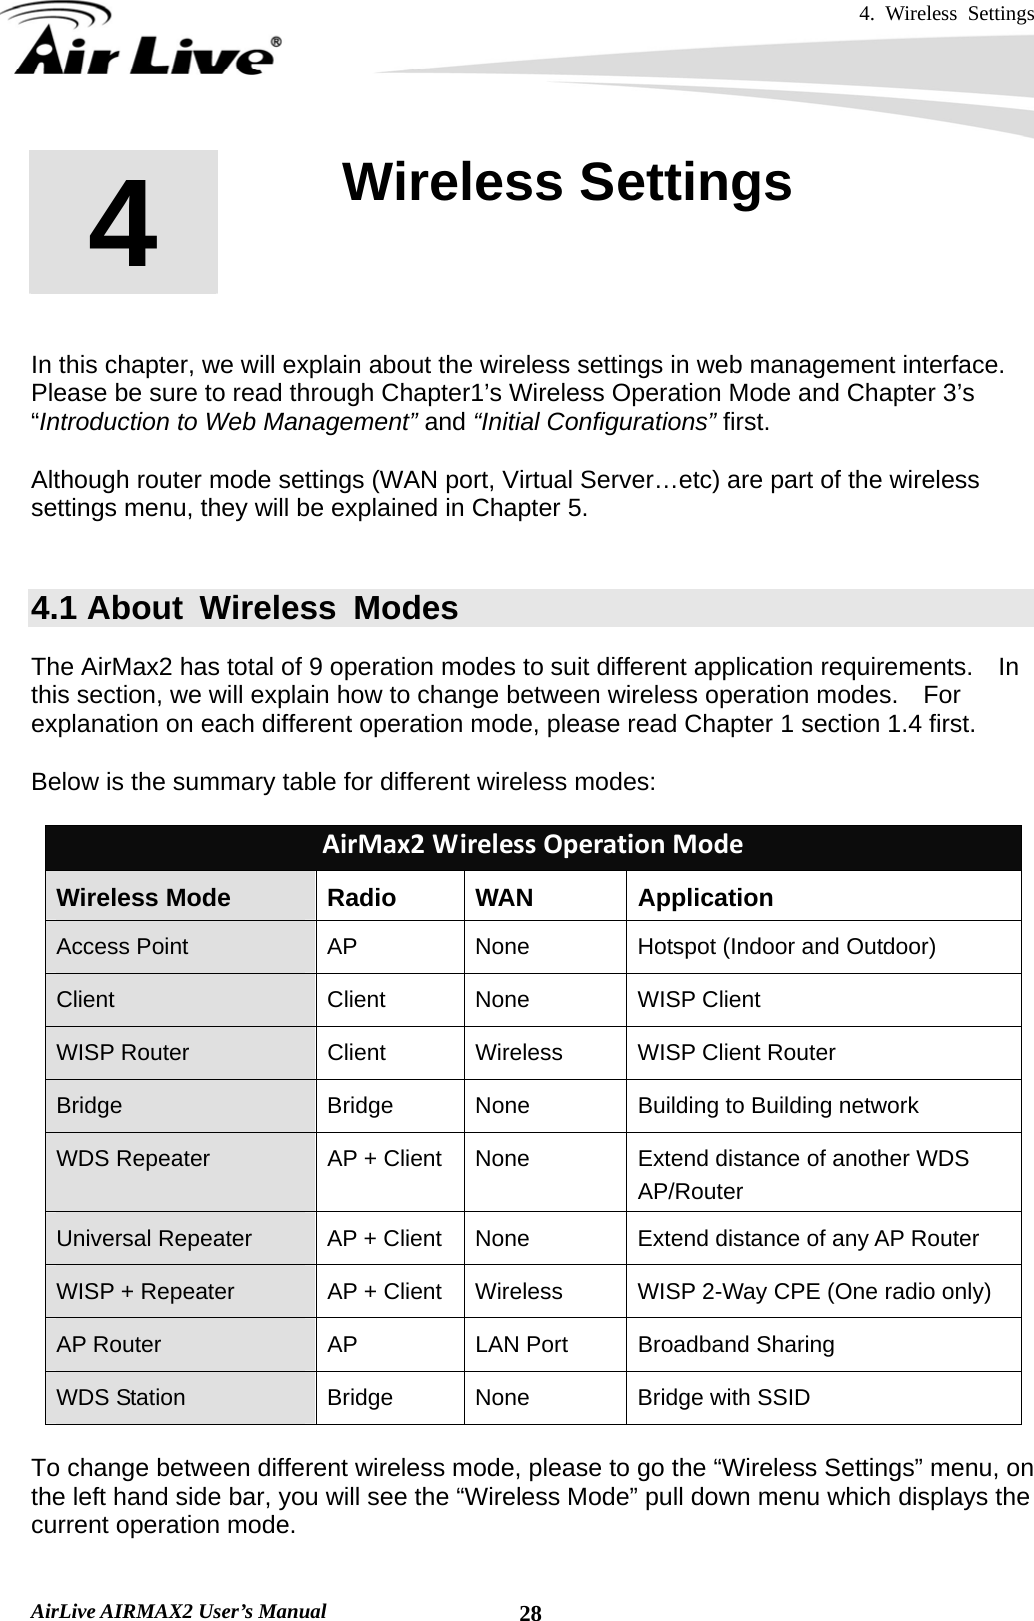 4. Wireless Settings   AirLive AIRMAX2 User’s Manual  28       In this chapter, we will explain about the wireless settings in web management interface.   Please be sure to read through Chapter1’s Wireless Operation Mode and Chapter 3’s “Introduction to Web Management” and “Initial Configurations” first.    Although router mode settings (WAN port, Virtual Server…etc) are part of the wireless settings menu, they will be explained in Chapter 5.  4.1 About  Wireless  Modes The AirMax2 has total of 9 operation modes to suit different application requirements.    In this section, we will explain how to change between wireless operation modes.    For explanation on each different operation mode, please read Chapter 1 section 1.4 first.    Below is the summary table for different wireless modes:  AirMax2WirelessOperationModeWireless Mode  Radio  WAN  Application Access Point  AP  None  Hotspot (Indoor and Outdoor) Client Client None WISP Client WISP Router  Client  Wireless  WISP Client Router Bridge  Bridge  None  Building to Building network WDS Repeater  AP + Client  None  Extend distance of another WDS AP/Router Universal Repeater  AP + Client  None  Extend distance of any AP Router WISP + Repeater  AP + Client  Wireless  WISP 2-Way CPE (One radio only) AP Router  AP  LAN Port  Broadband Sharing WDS Station  Bridge  None  Bridge with SSID   To change between different wireless mode, please to go the “Wireless Settings” menu, on the left hand side bar, you will see the “Wireless Mode” pull down menu which displays the current operation mode.  4  4. Wireless Settings  